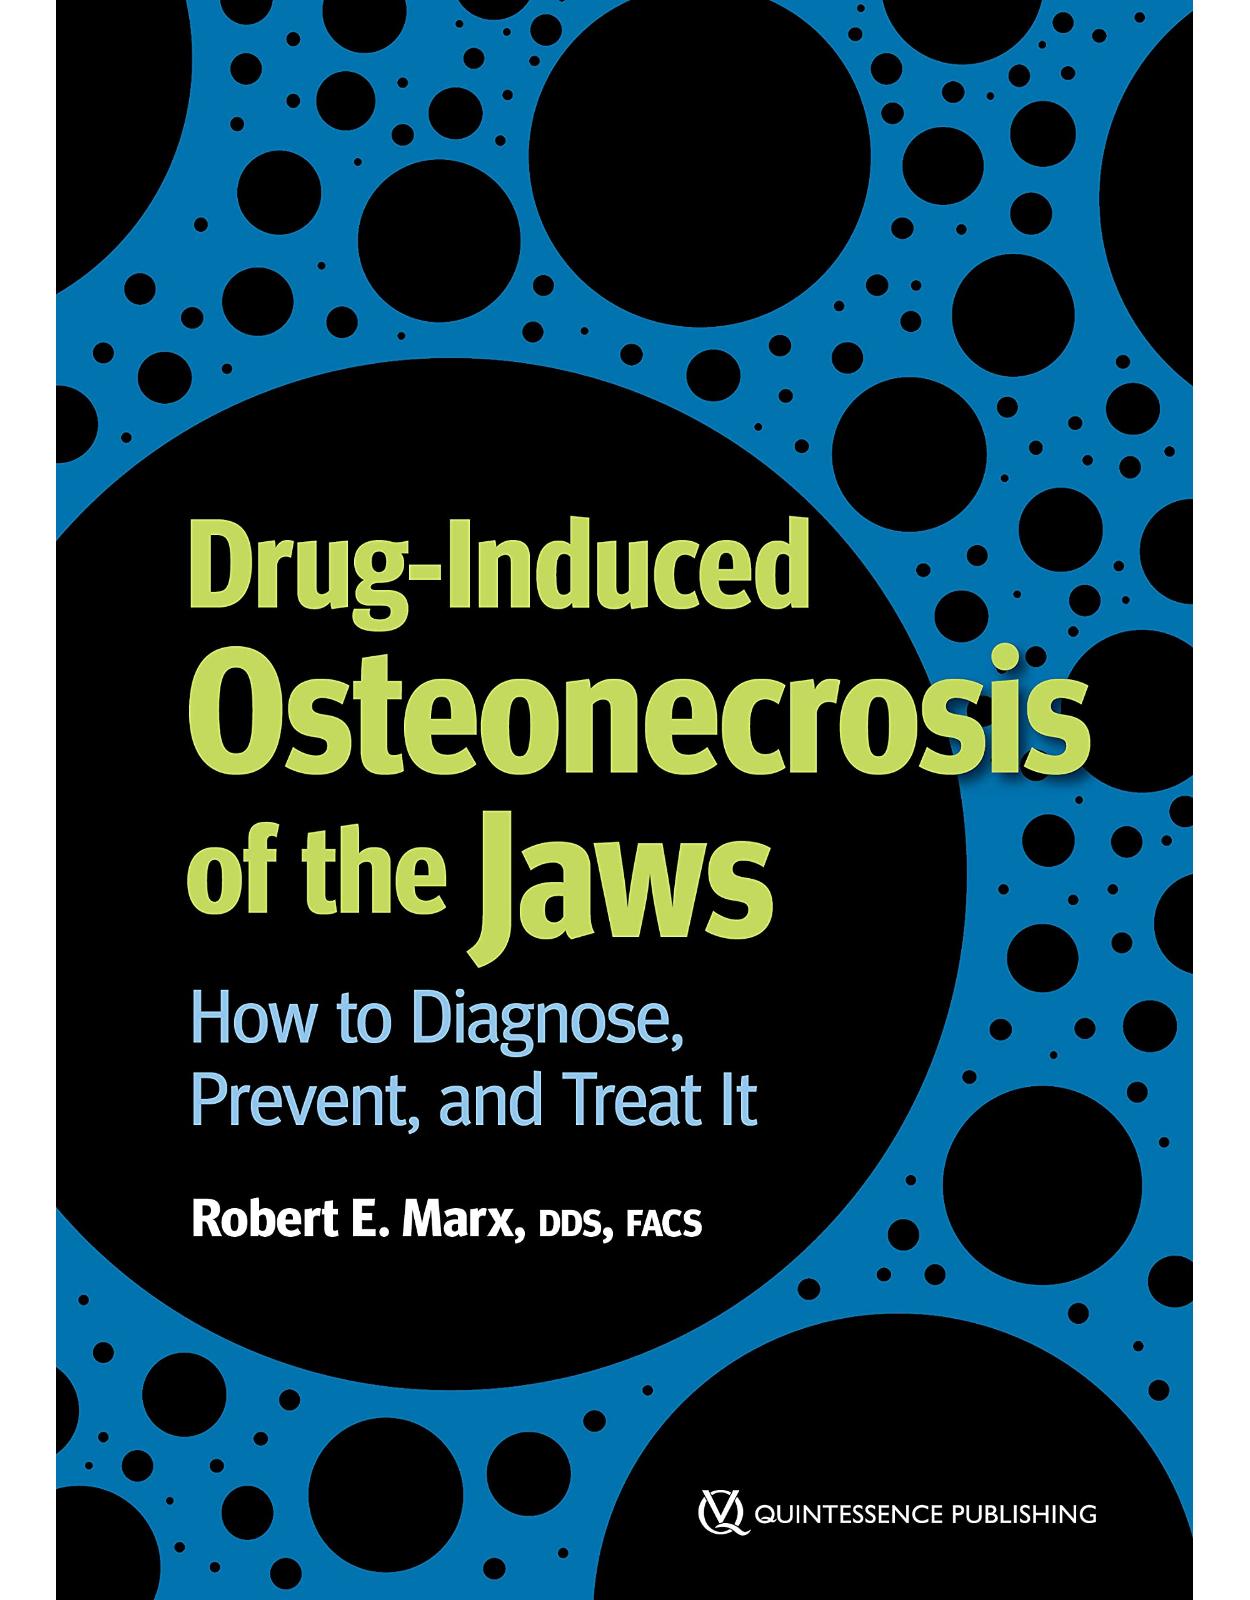 Drug-Induced Osteonecrosis of the Jaws: How to Diagnose, Prevent, and Treat It